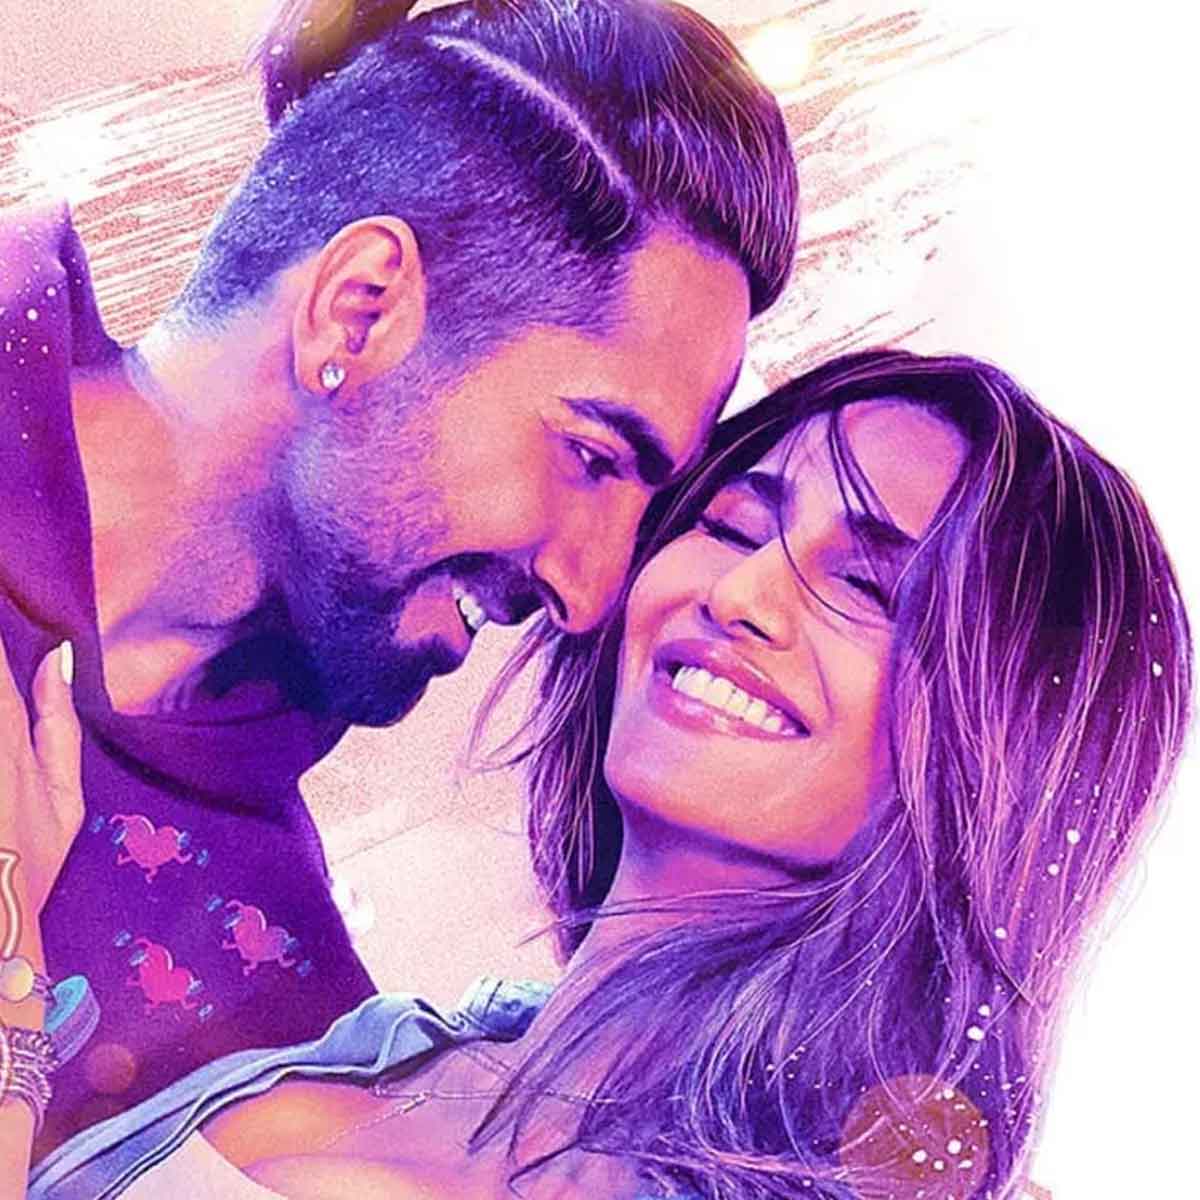 Chandigarh Kare Aashiqui Box Office Day 1: Ayushmann Khurrana’s film gets a slow start, earns Rs 3.25 crore